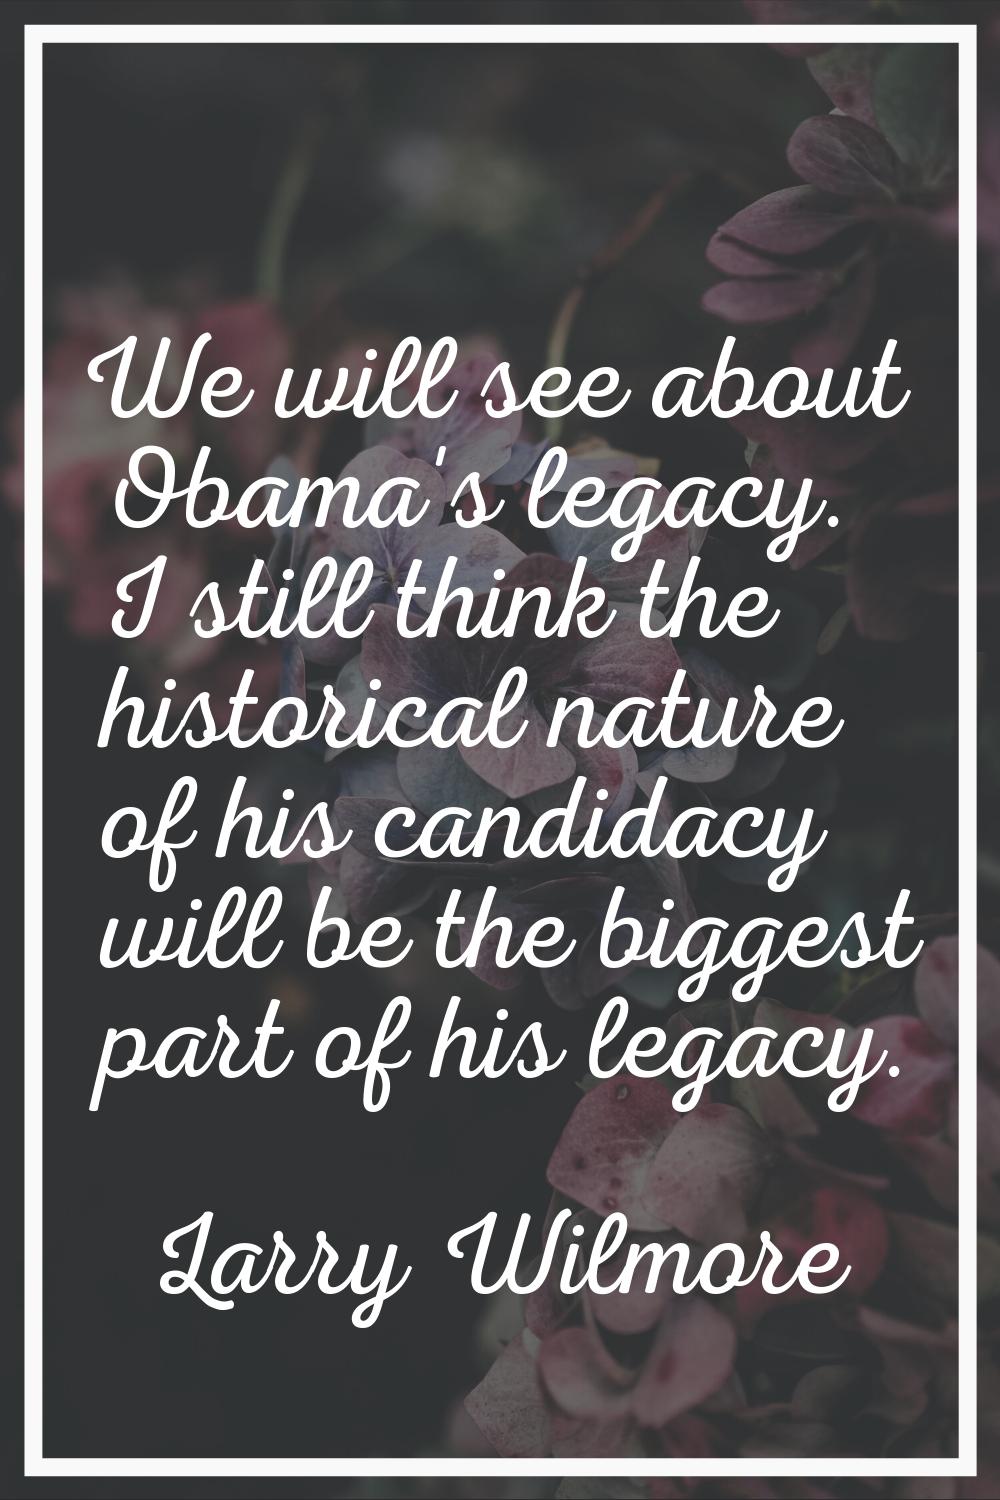 We will see about Obama's legacy. I still think the historical nature of his candidacy will be the 